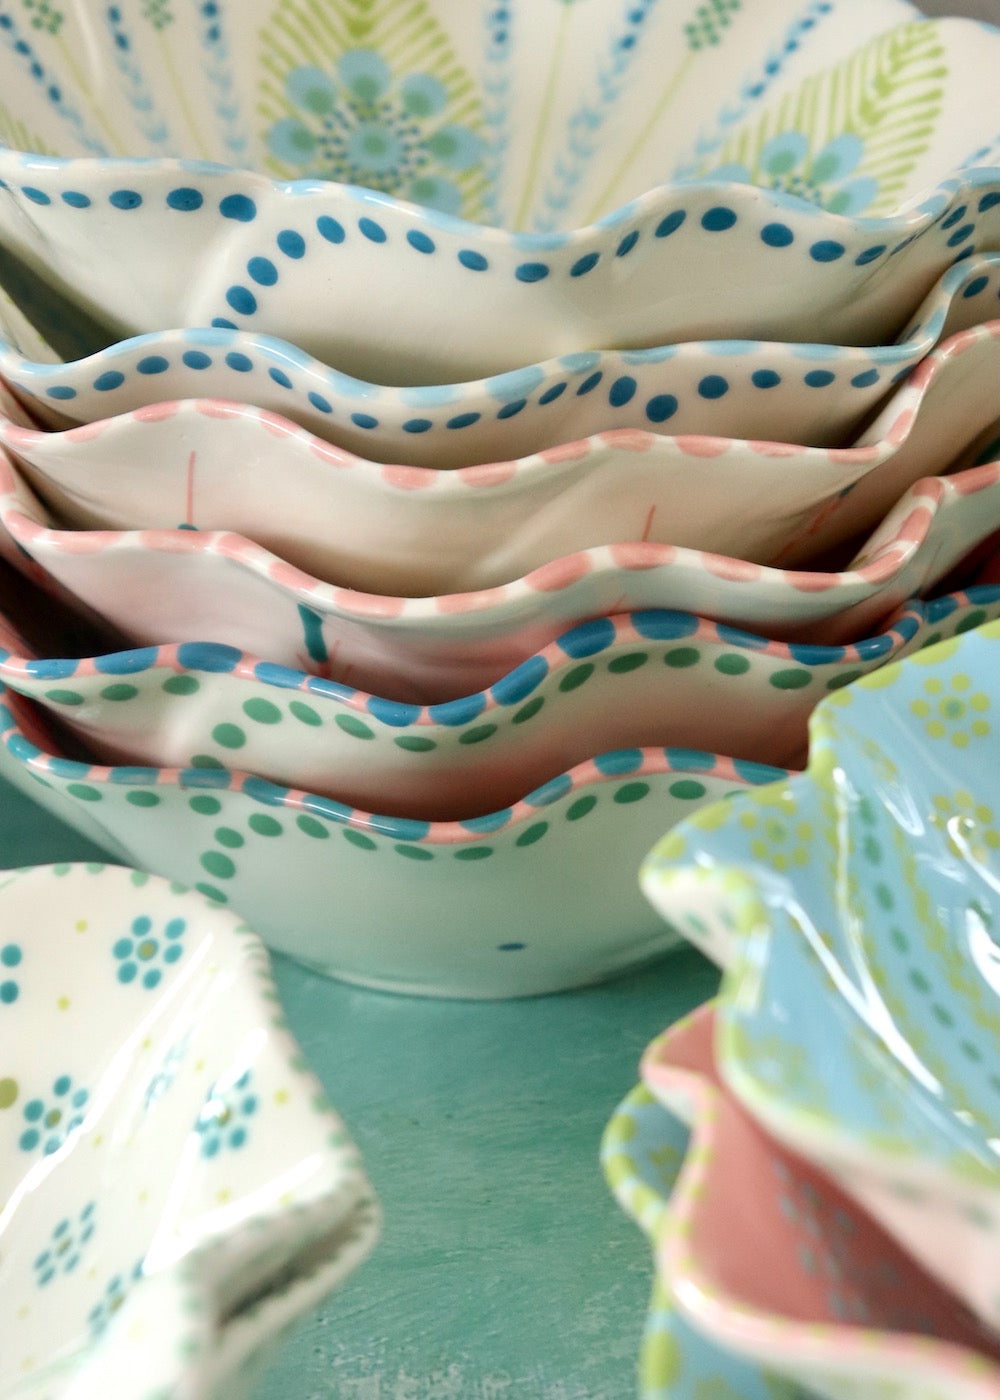 Pasta Bowl - White, Blue Dots & Pink Fronds